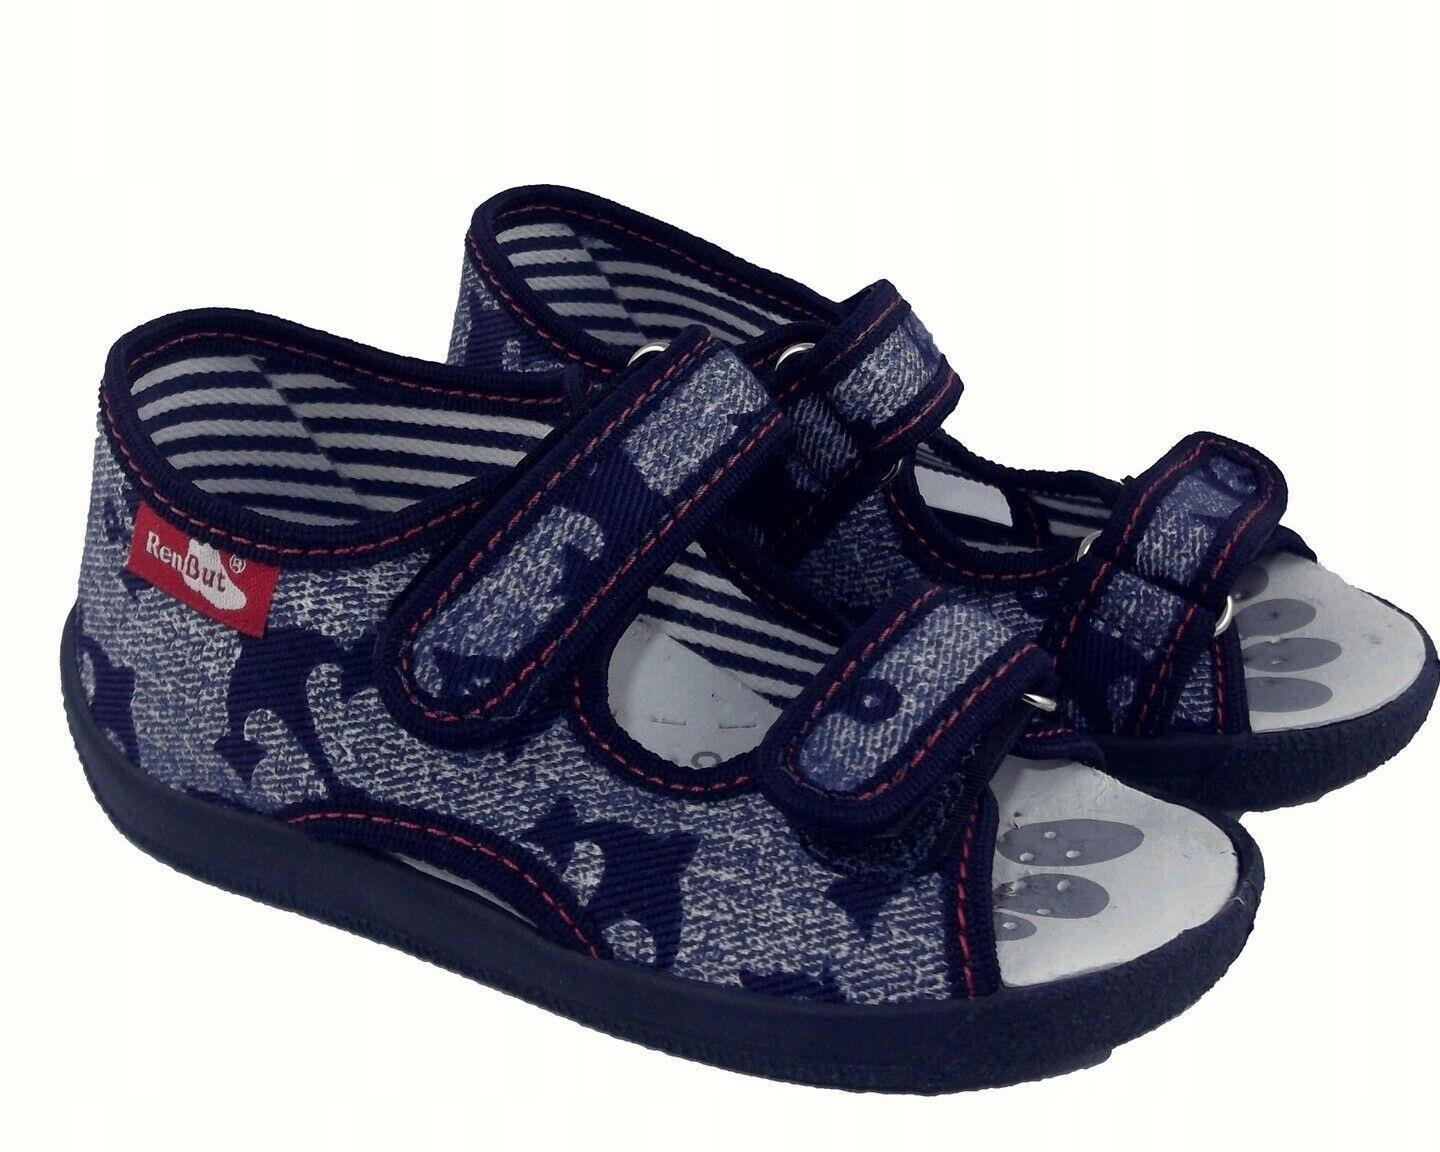 Boys Sandals Baby Children Kids Toddler Infant Casual Canvas Shoes Fasten #16